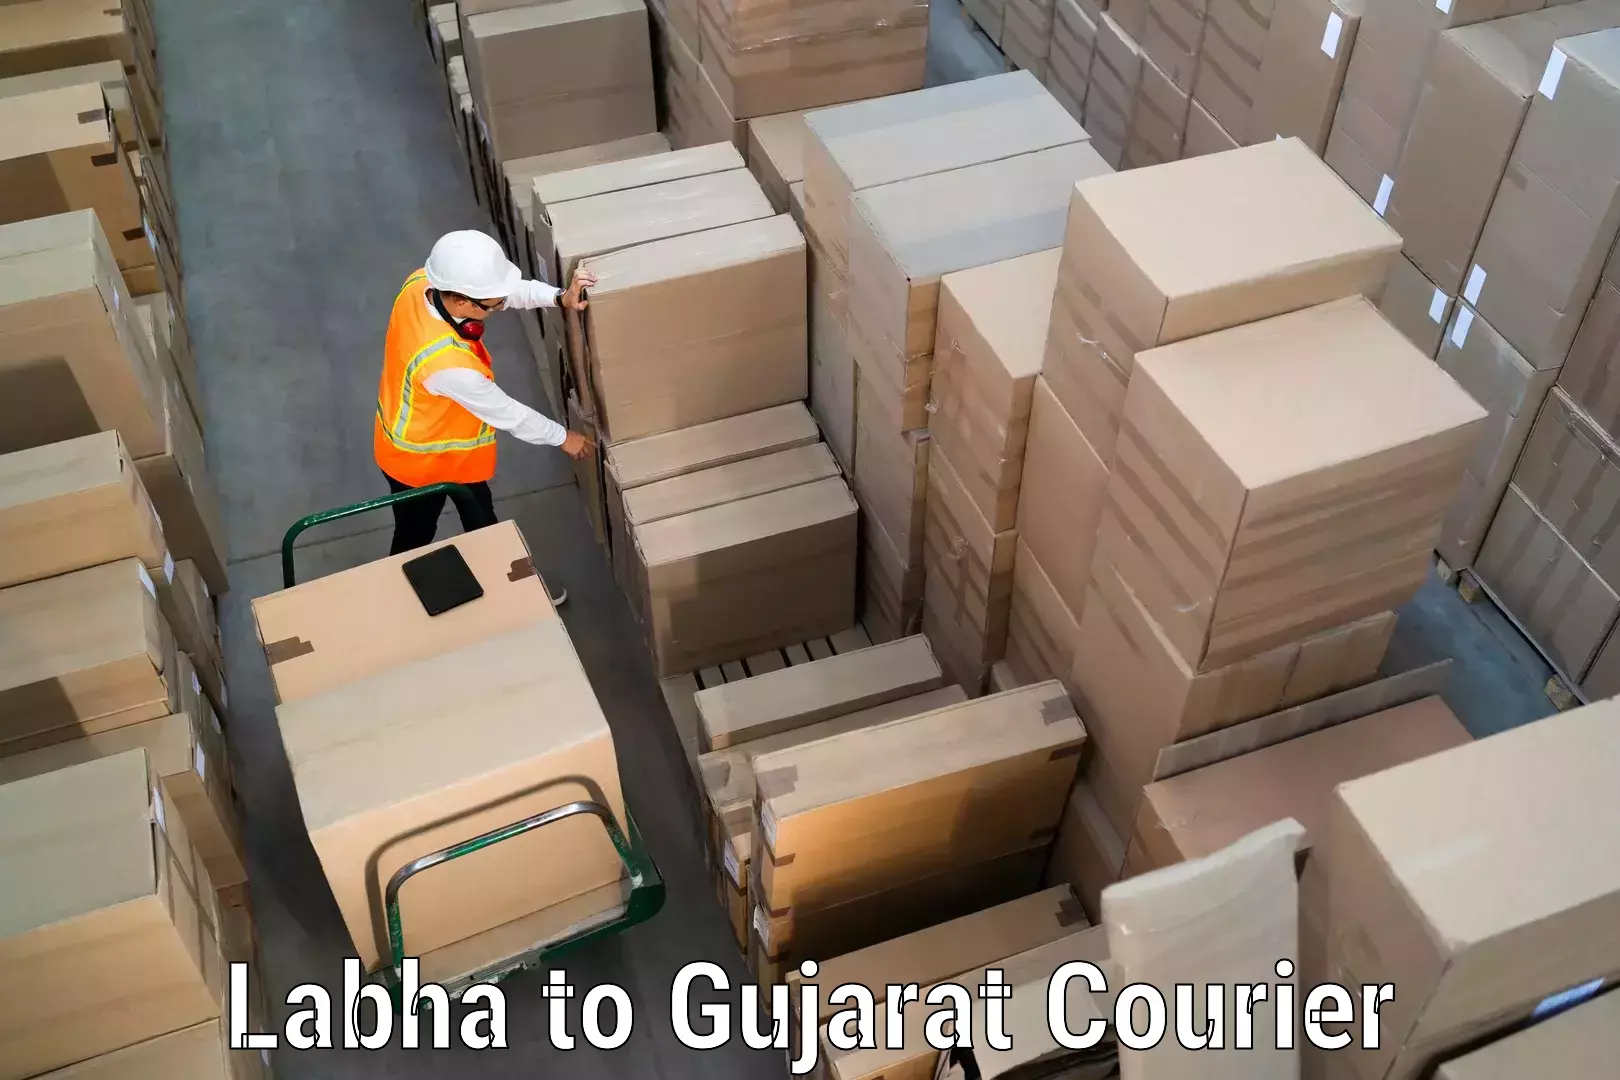 24-hour courier service Labha to Gujarat